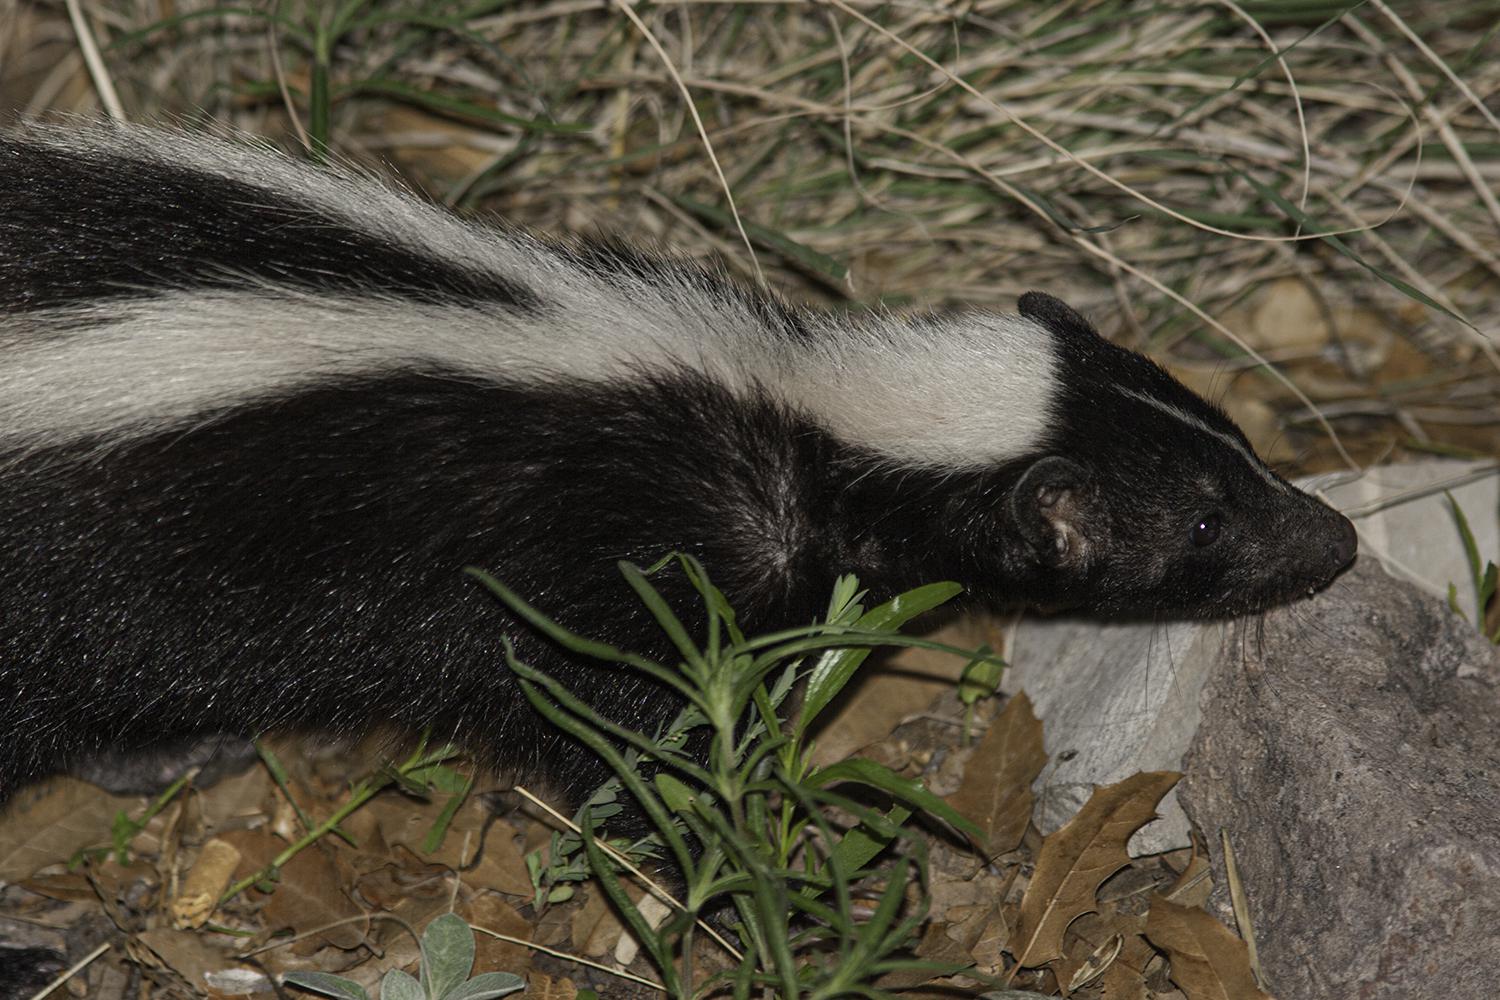 What's the big stink? Here are facts to know about Houston's striped skunk